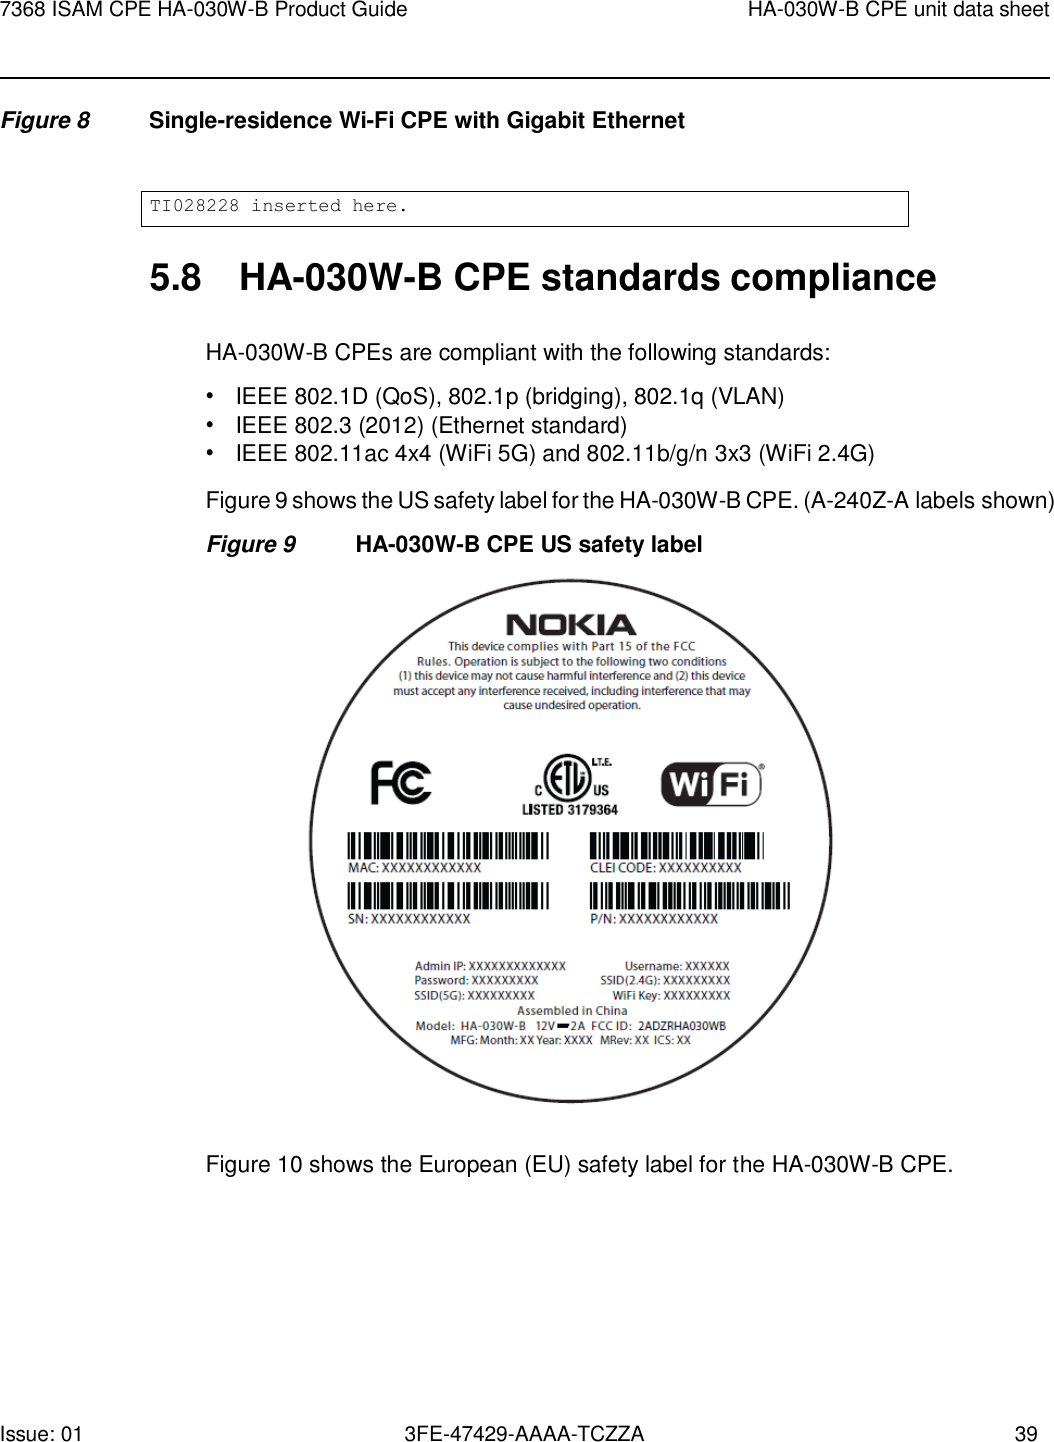 Issue: 01 3FE-47429-AAAA-TCZZA 39 7368 ISAM CPE HA-030W-B Product Guide HA-030W-B CPE unit data sheet    Figure 8  Single-residence Wi-Fi CPE with Gigabit Ethernet    5.8  HA-030W-B CPE standards compliance  HA-030W-B CPEs are compliant with the following standards: • IEEE 802.1D (QoS), 802.1p (bridging), 802.1q (VLAN) • IEEE 802.3 (2012) (Ethernet standard) • IEEE 802.11ac 4x4 (WiFi 5G) and 802.11b/g/n 3x3 (WiFi 2.4G) Figure 9 shows the US safety label for the HA-030W-B CPE. (A-240Z-A labels shown) Figure 9  HA-030W-B CPE US safety label                                                                             Figure 10 shows the European (EU) safety label for the HA-030W-B CPE.                TI028228 inserted here. 